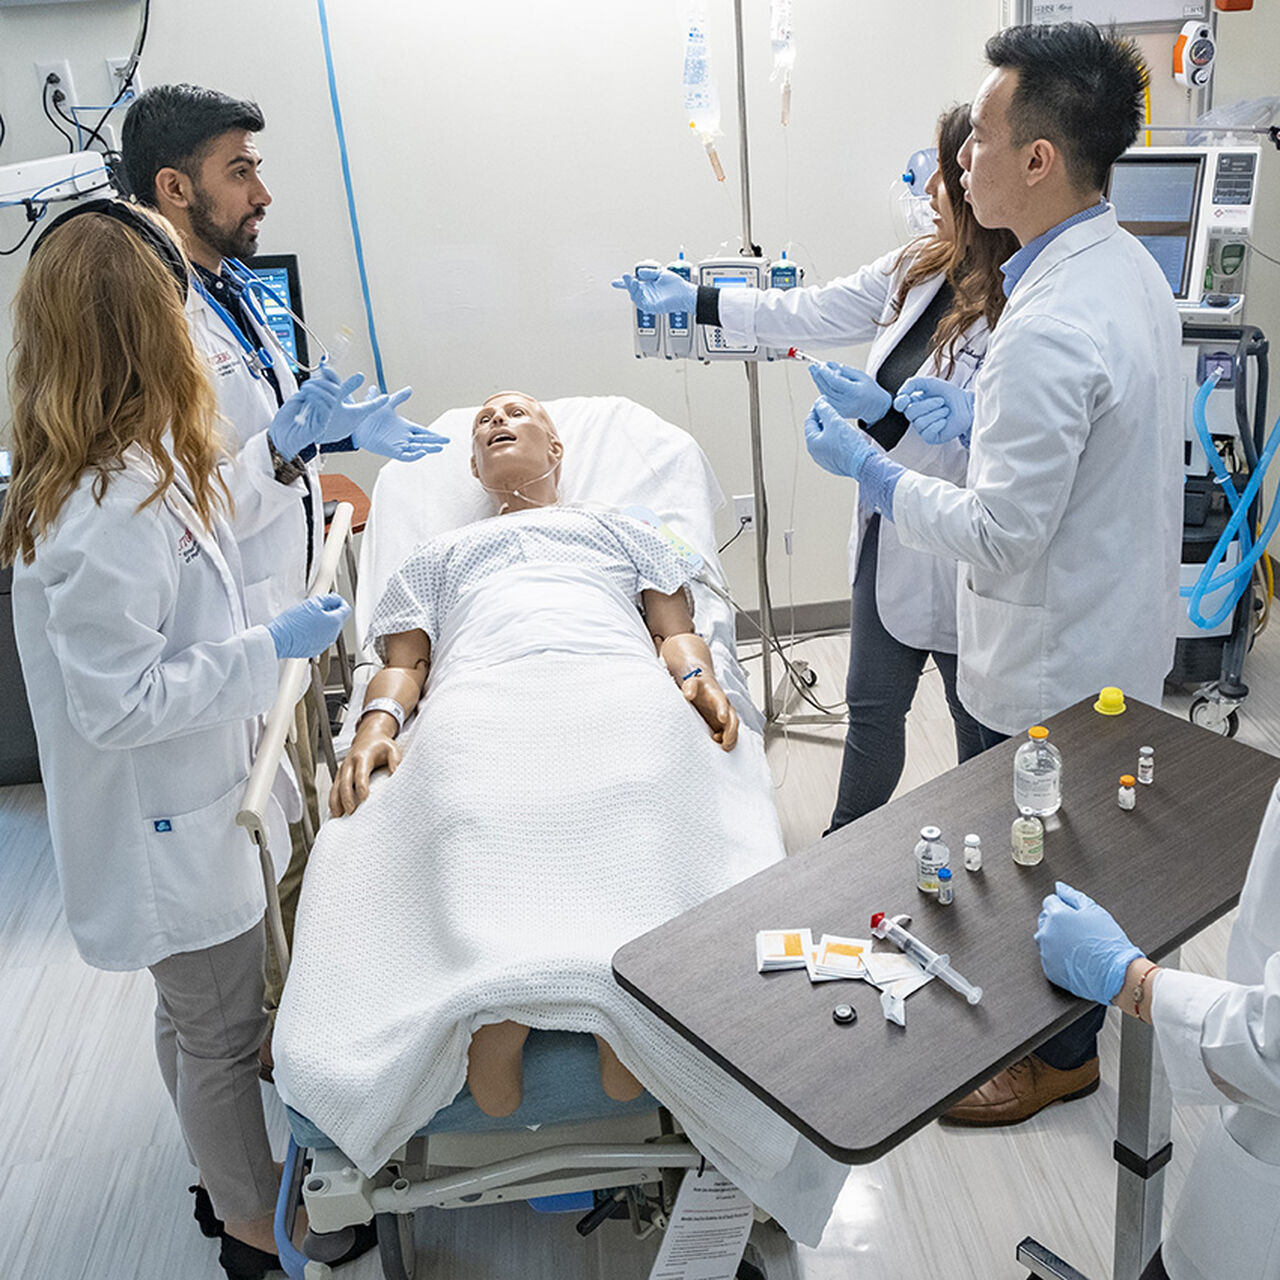 Pharmacy students working in simulation lab image number 0